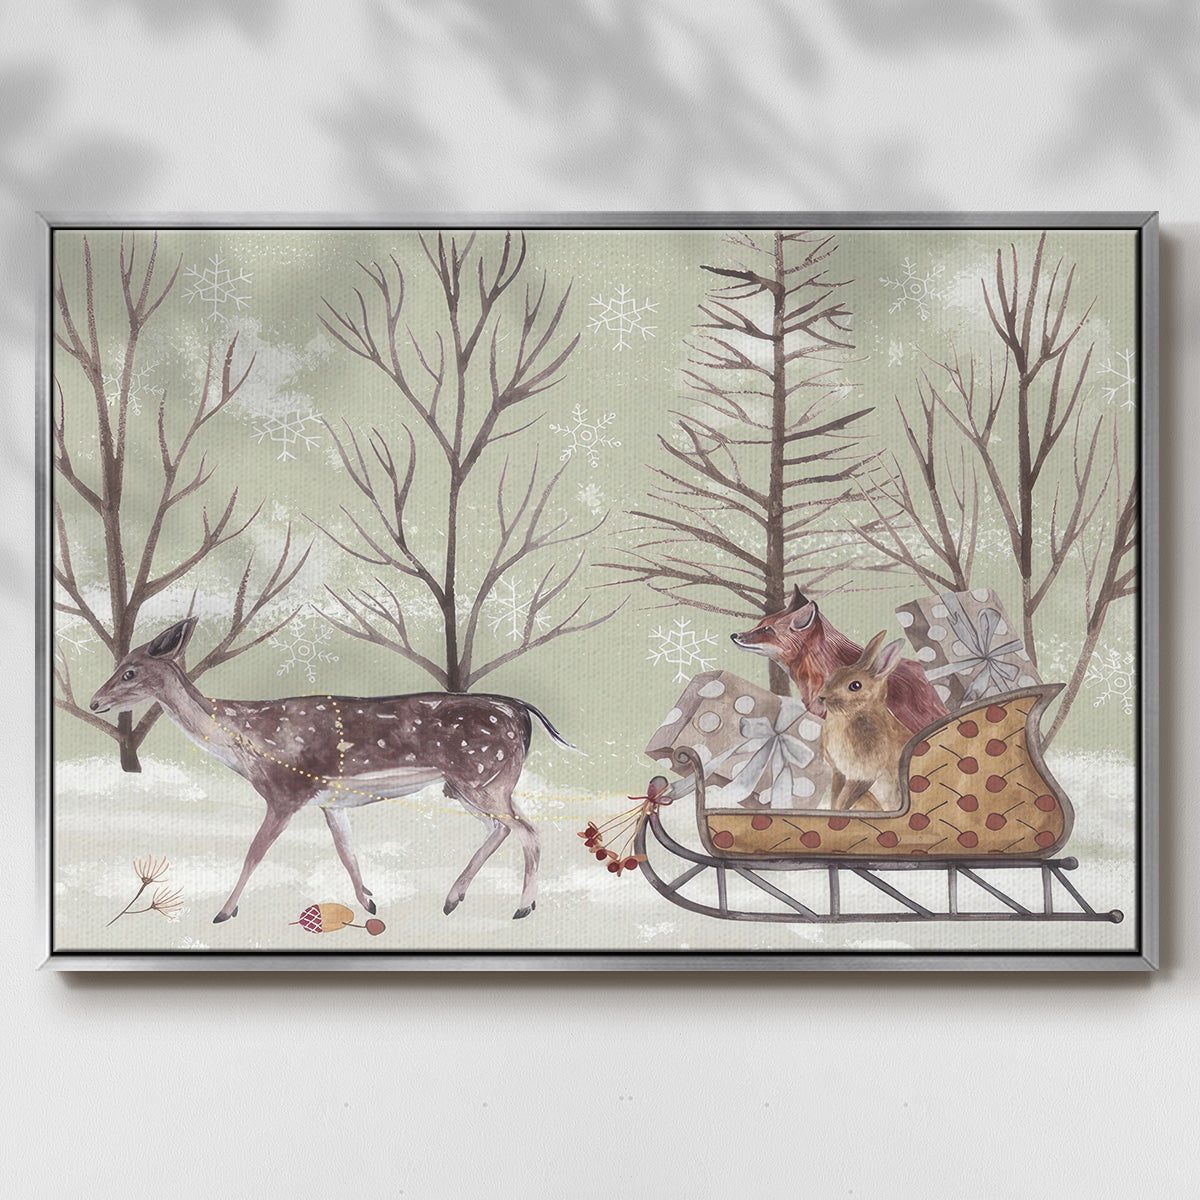 Christmas Time II - Framed Gallery Wrapped Canvas in Floating Frame